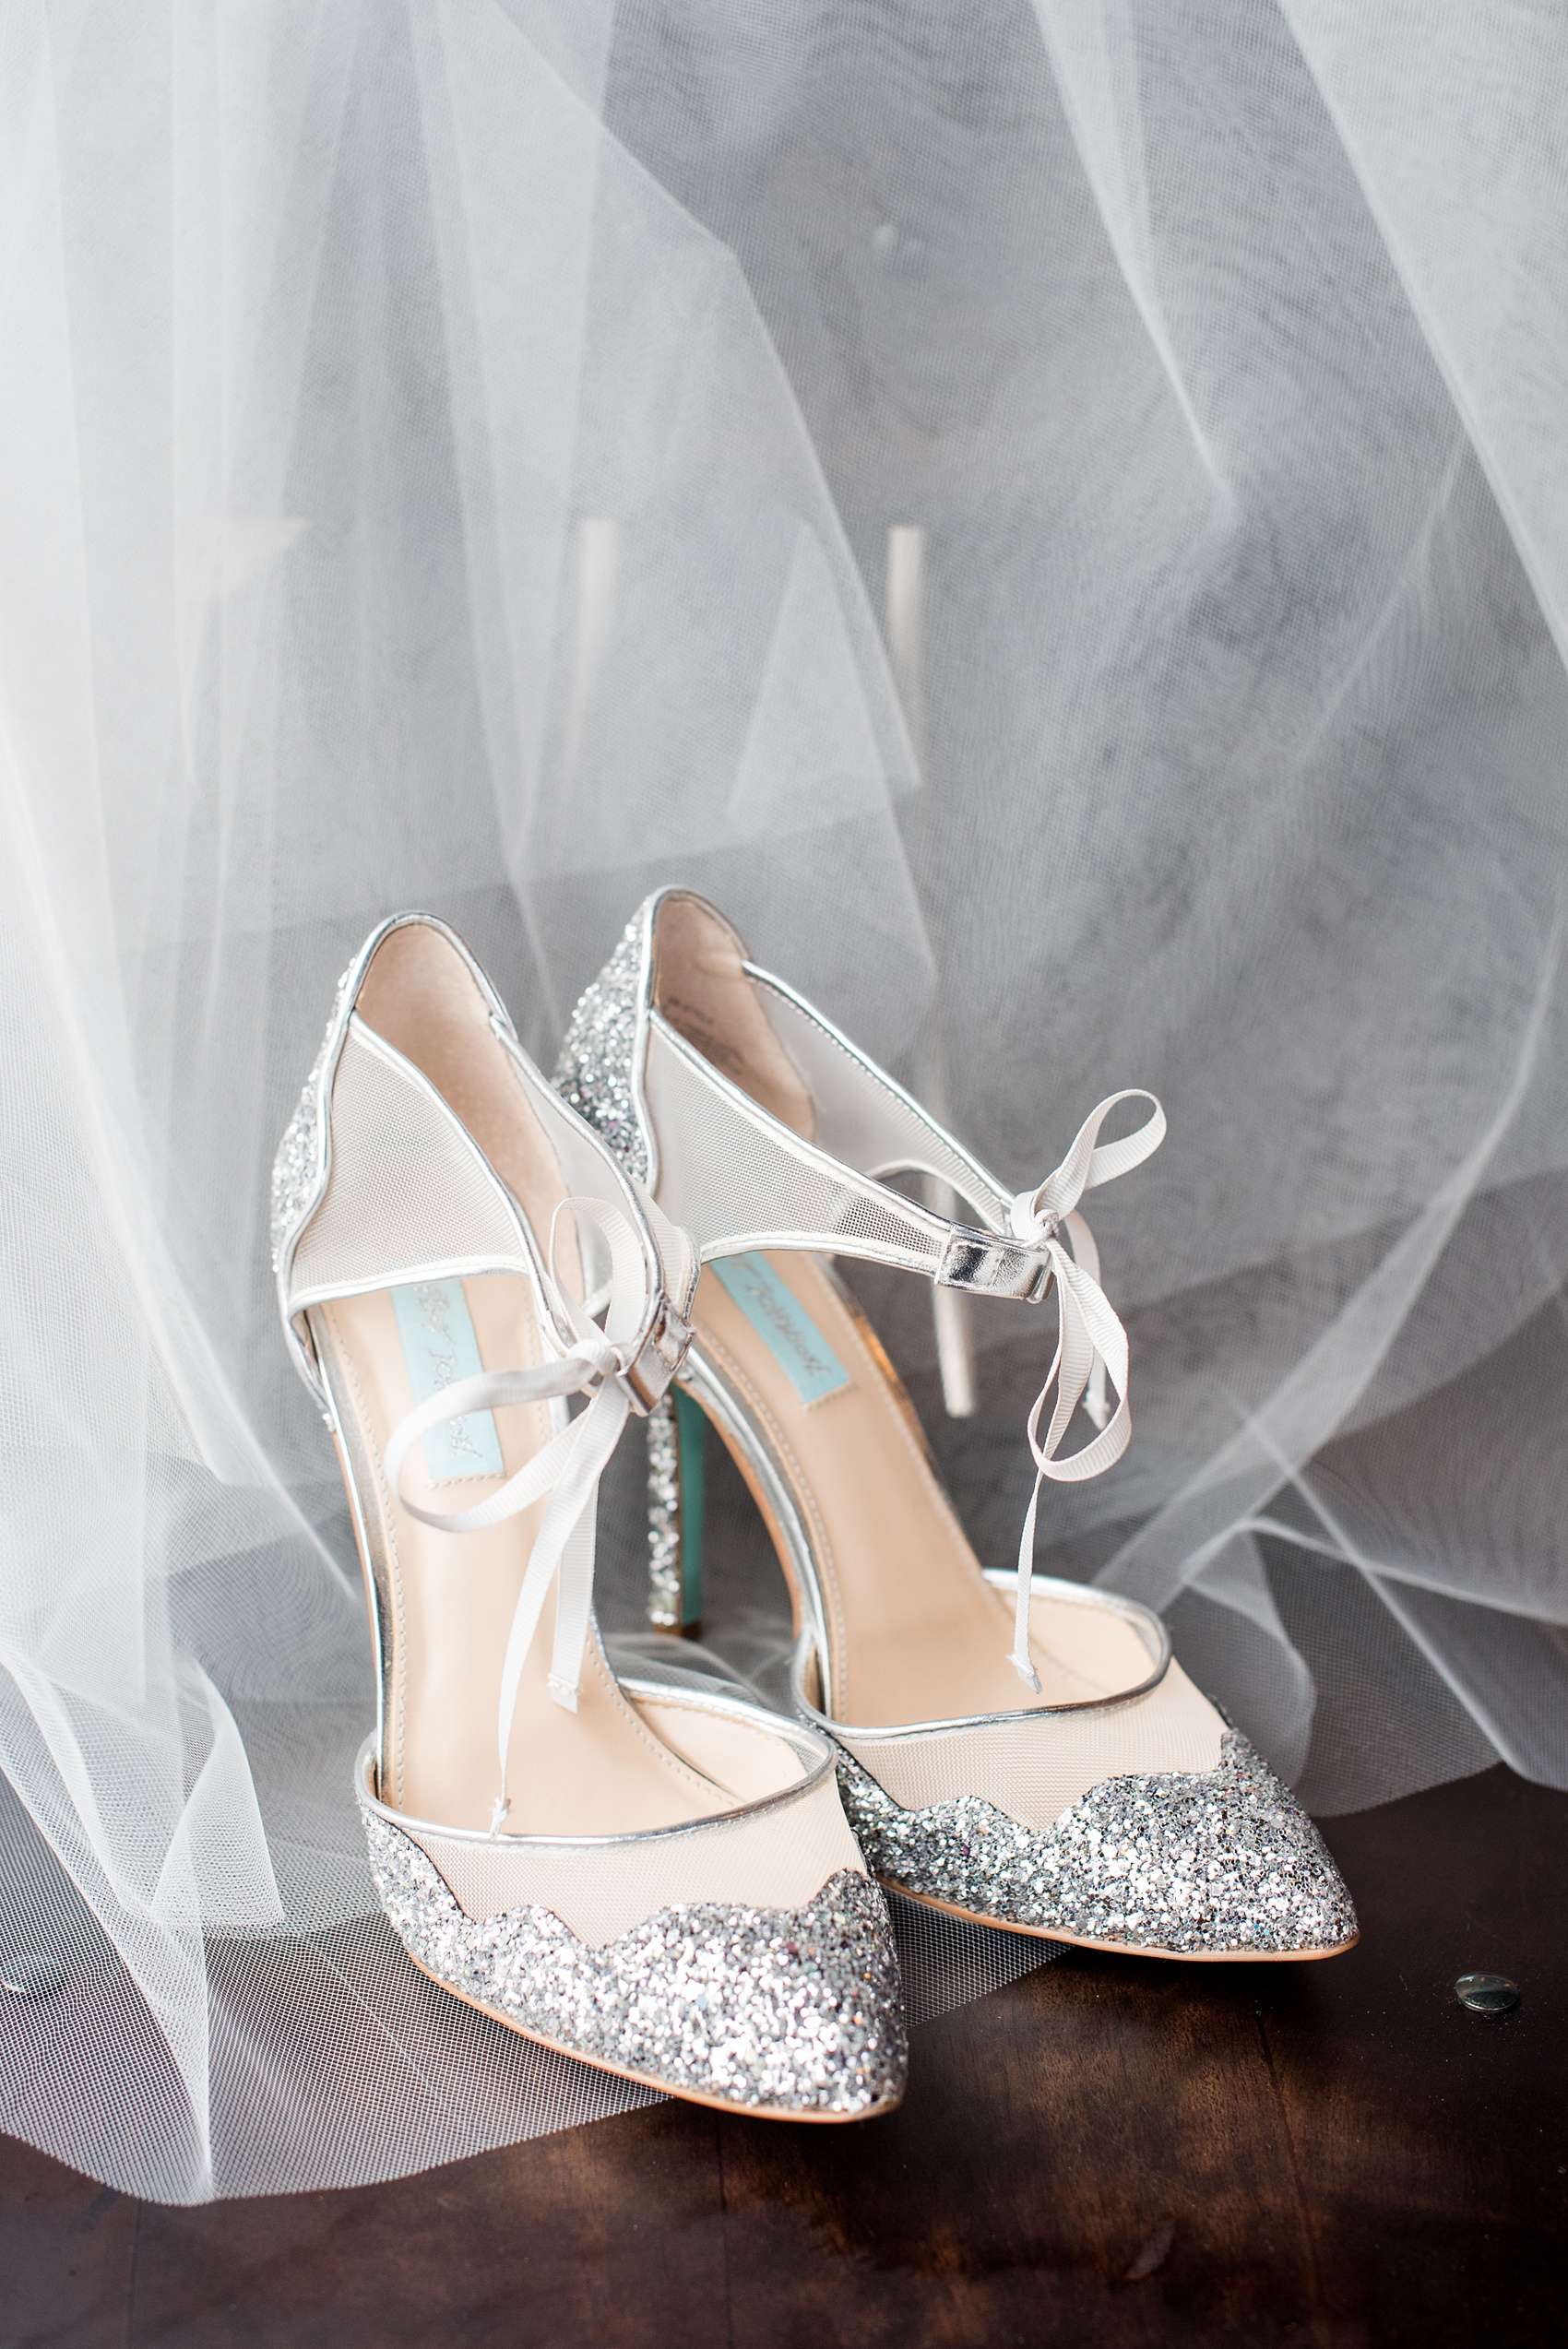 Durham wedding photos at The Cookery by Mikkel Paige Photography in North Carolina. The bride wore silver glitter and white mesh heels by Betsy Johnson and wore a simple veil.